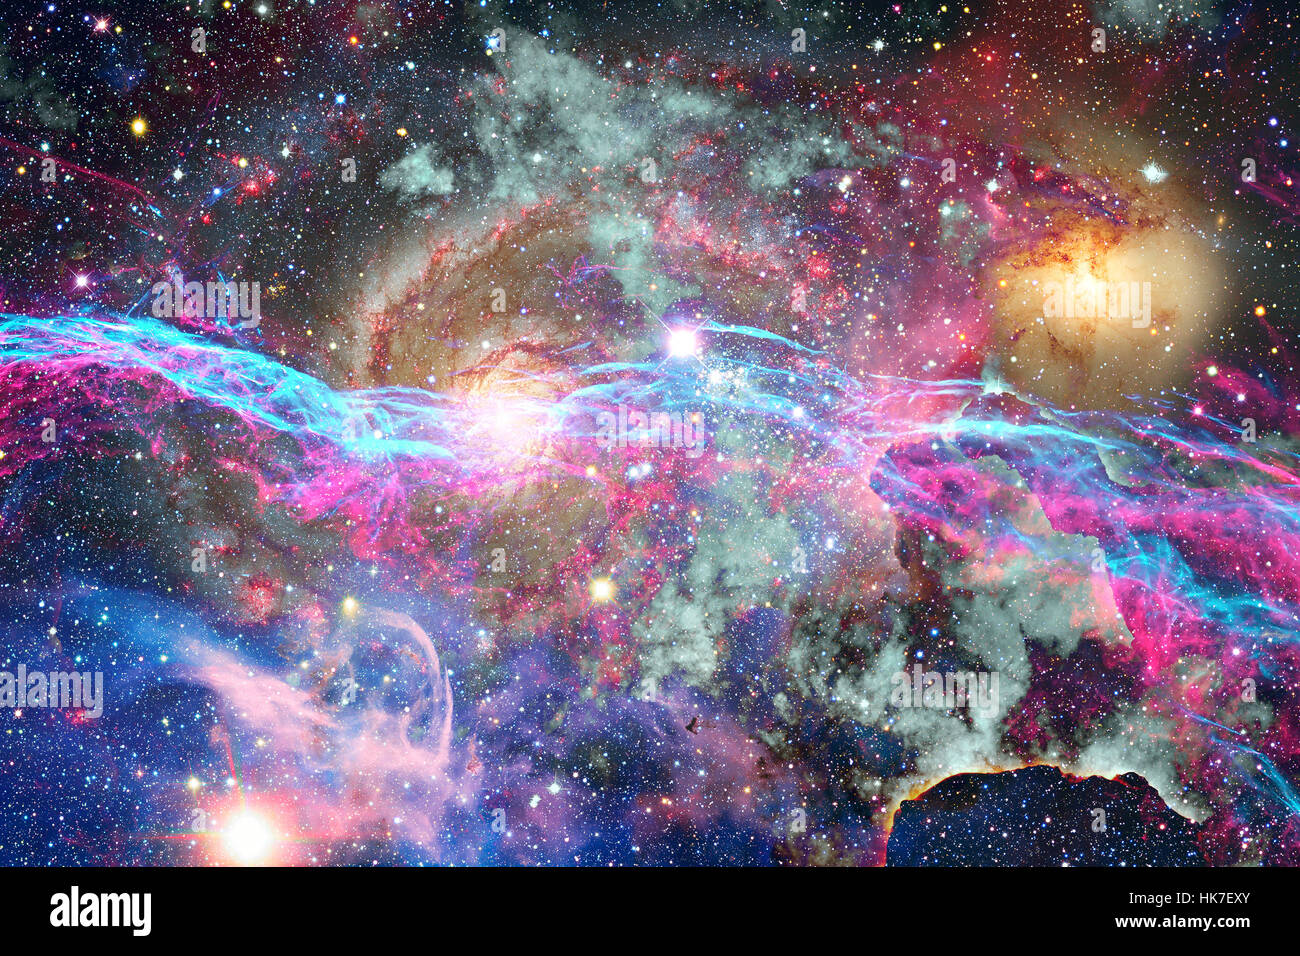 Galaxy and Nebula. Abstract space background. Stock Photo